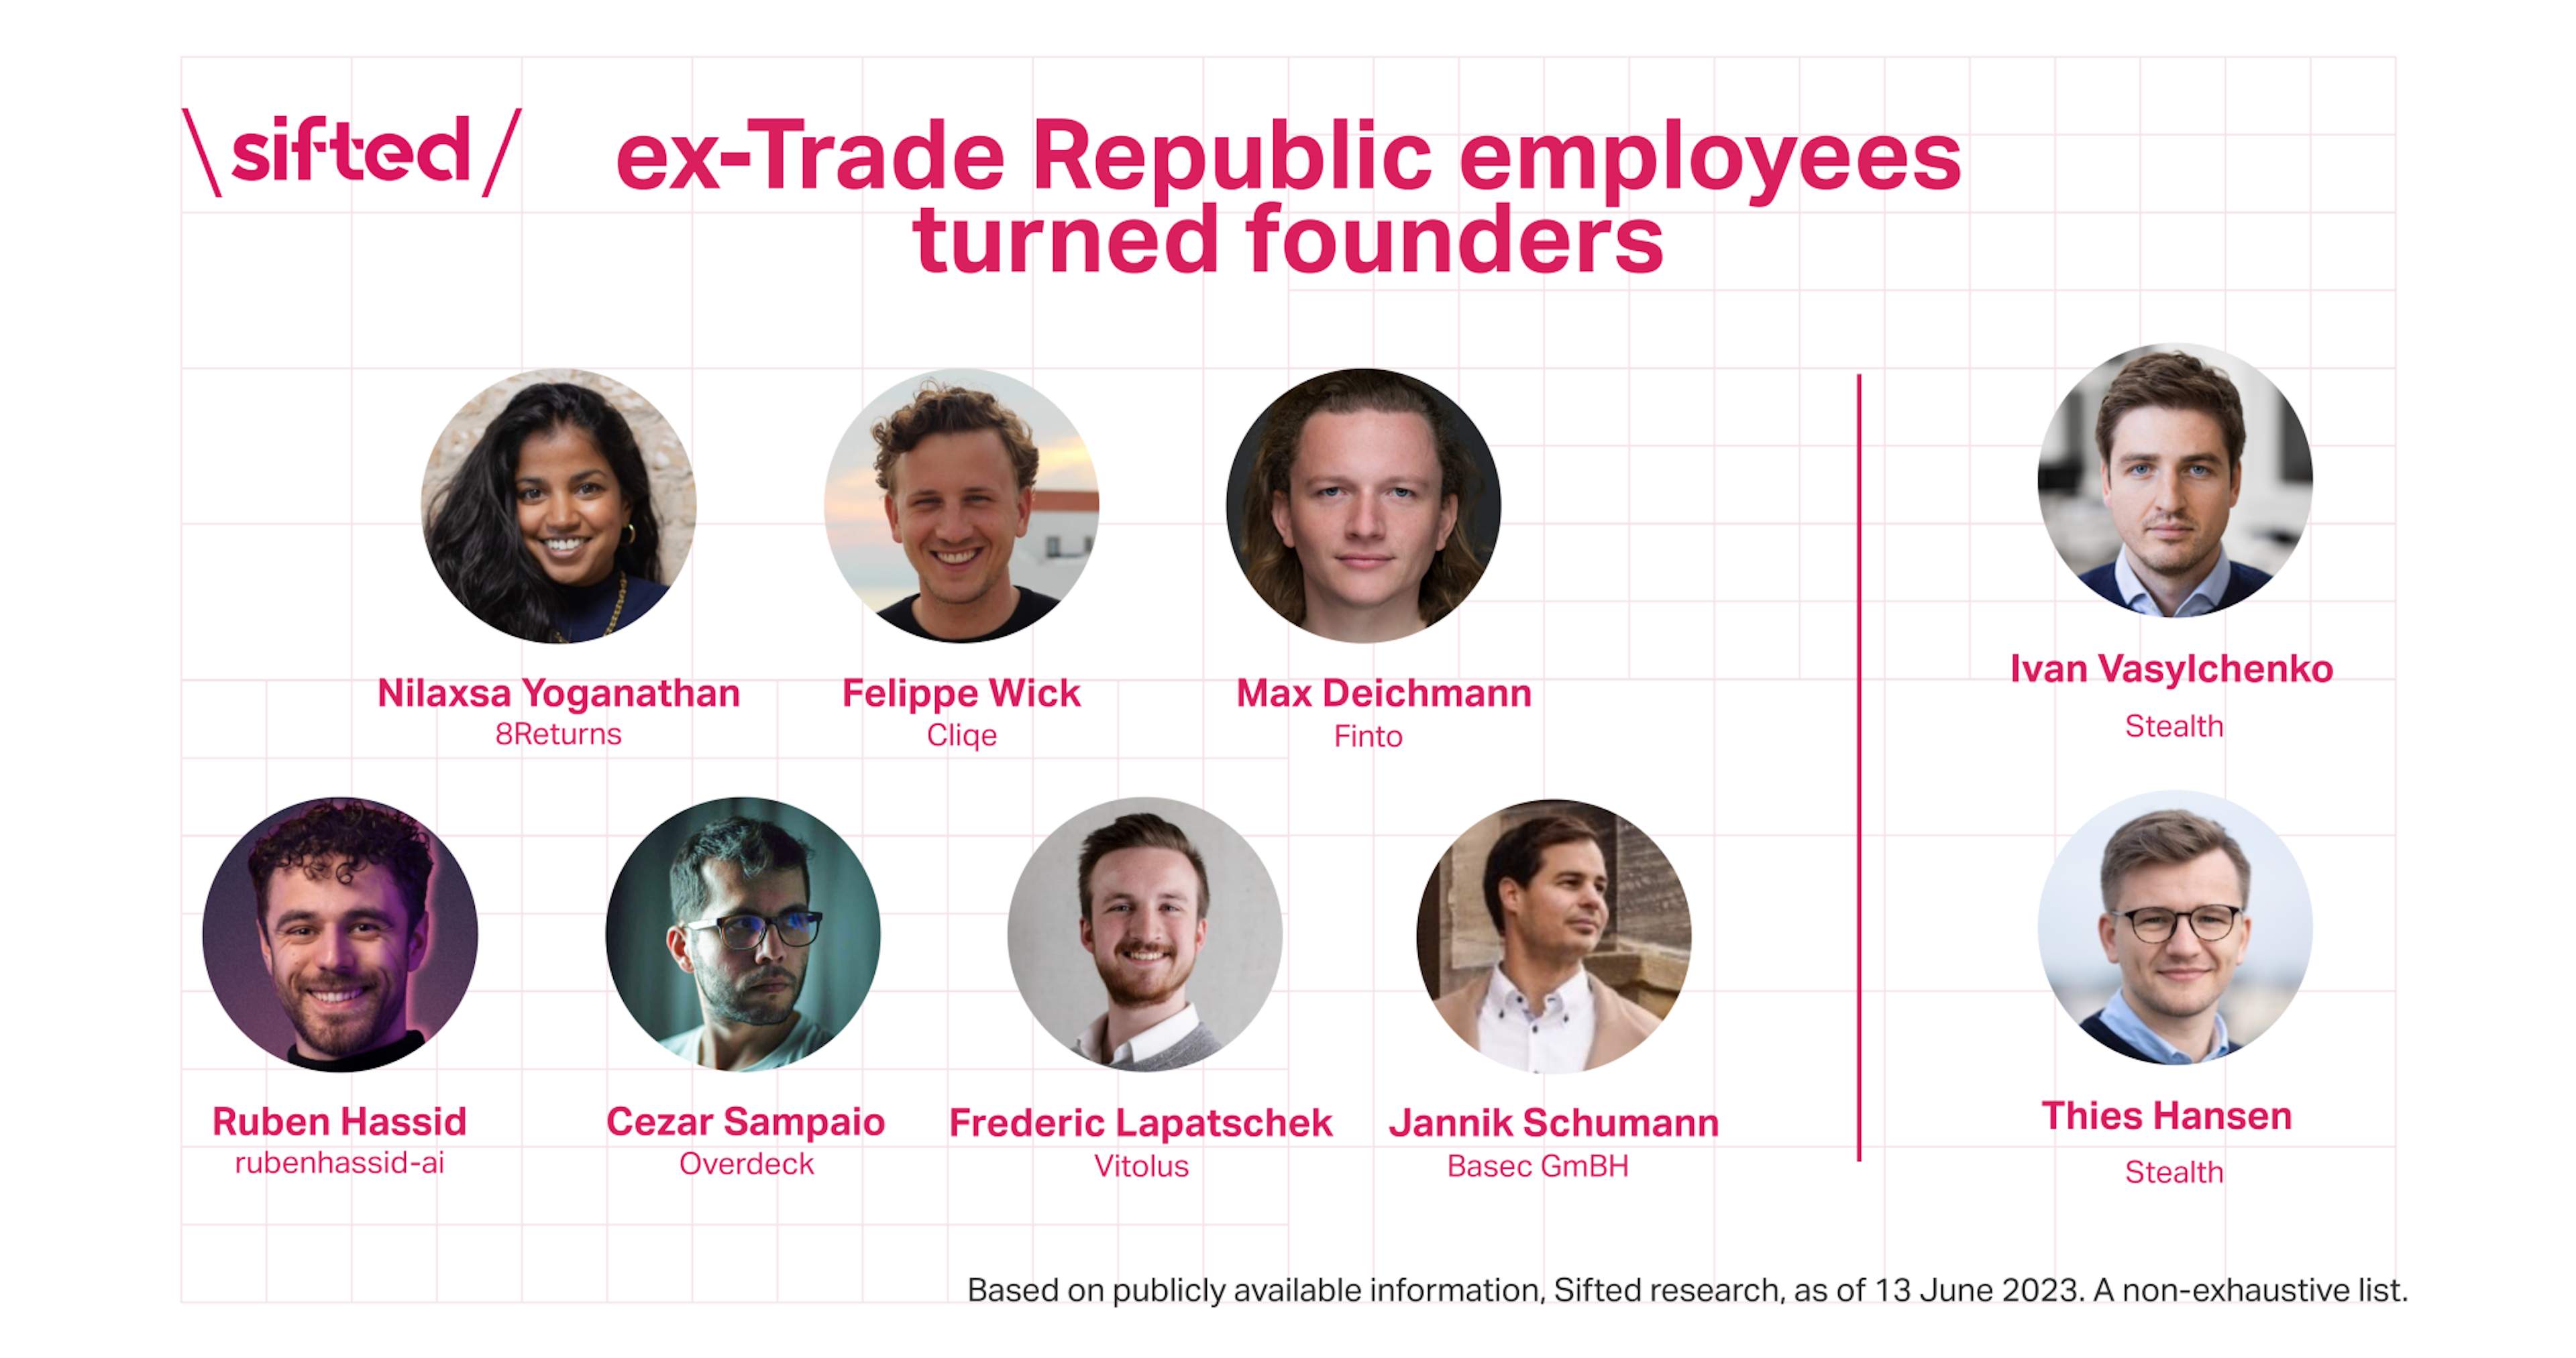 Headshot chart showing the ex-Trade Republic employees turned founders